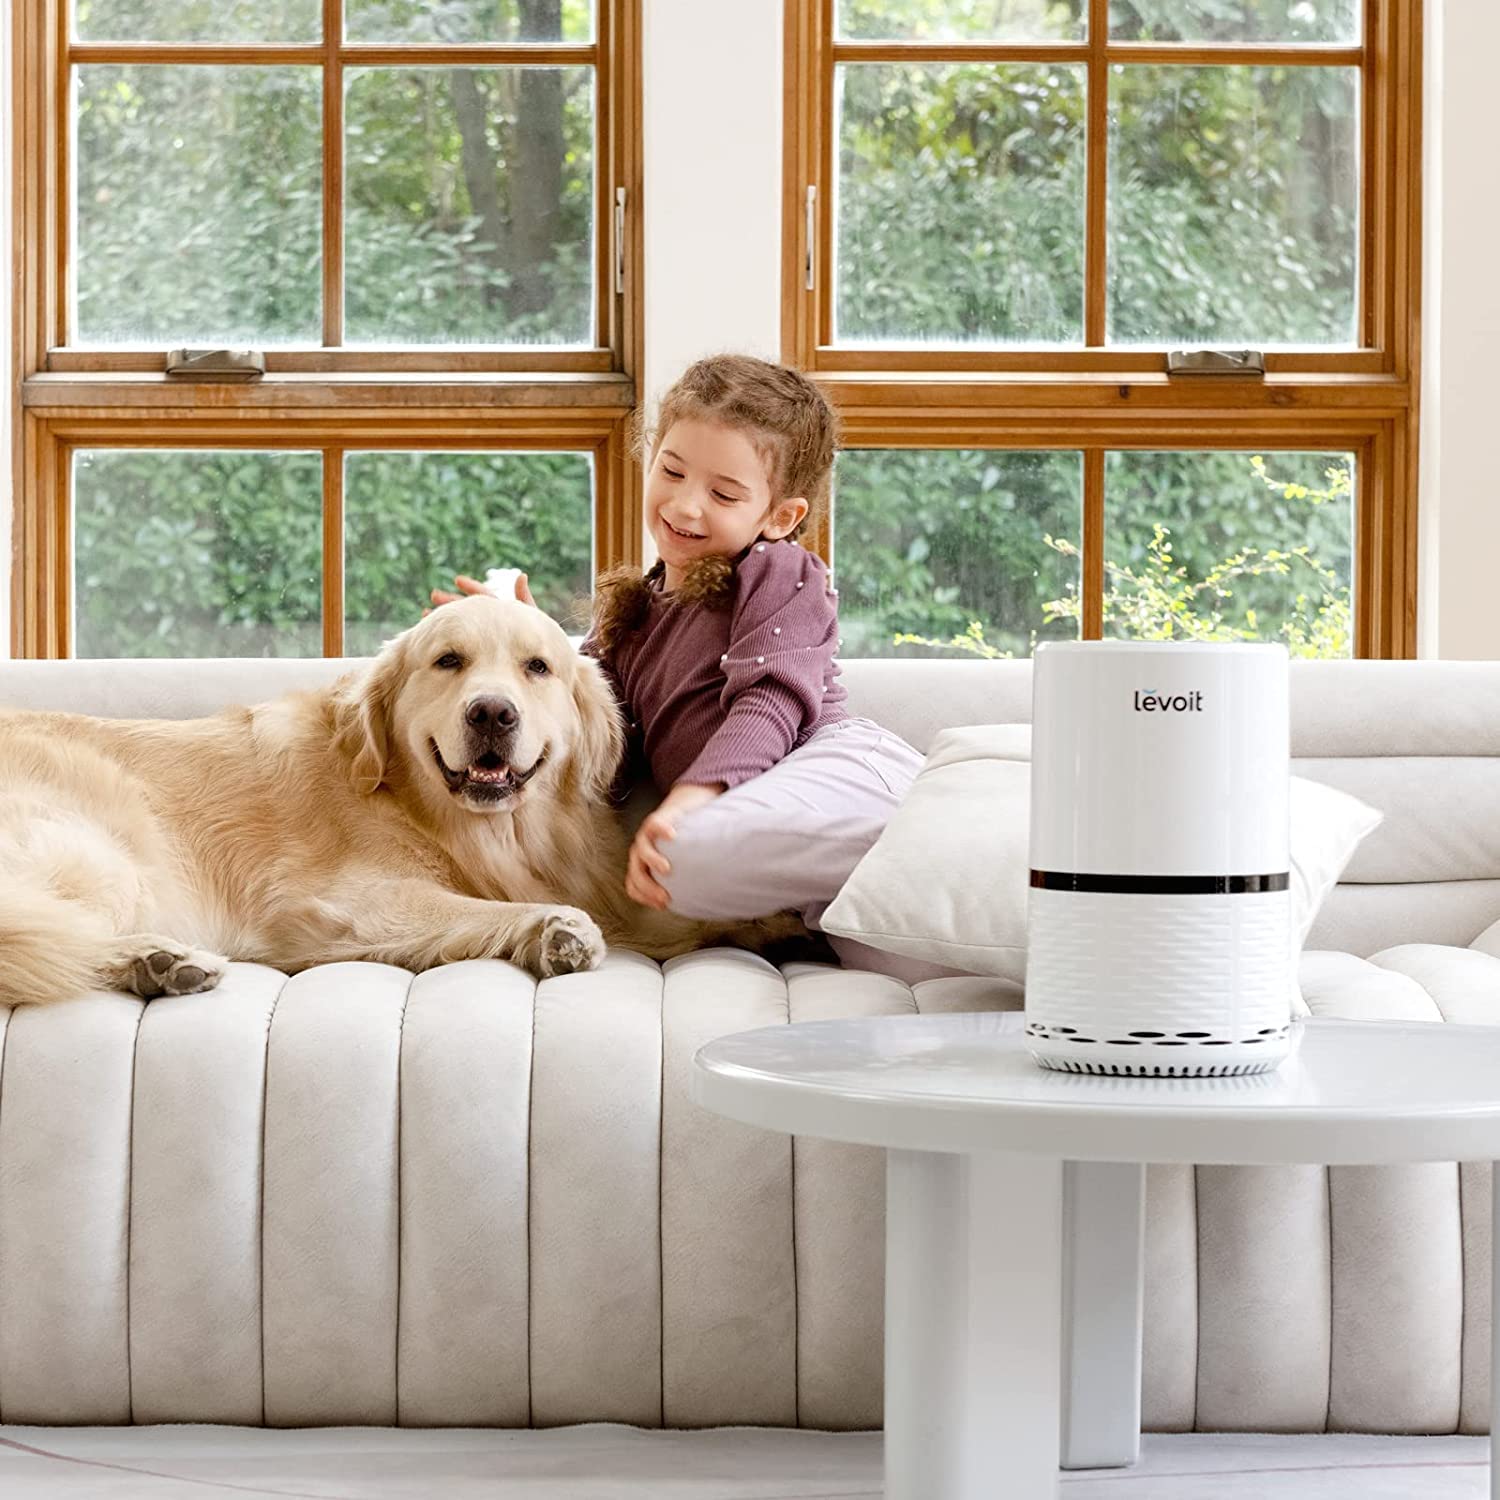 Levoit Air Purifier for Home , H13 True HEPA Filter for Allergies and Pets , Dust , Mold , and Pollen , Smoke and Odour Eliminator